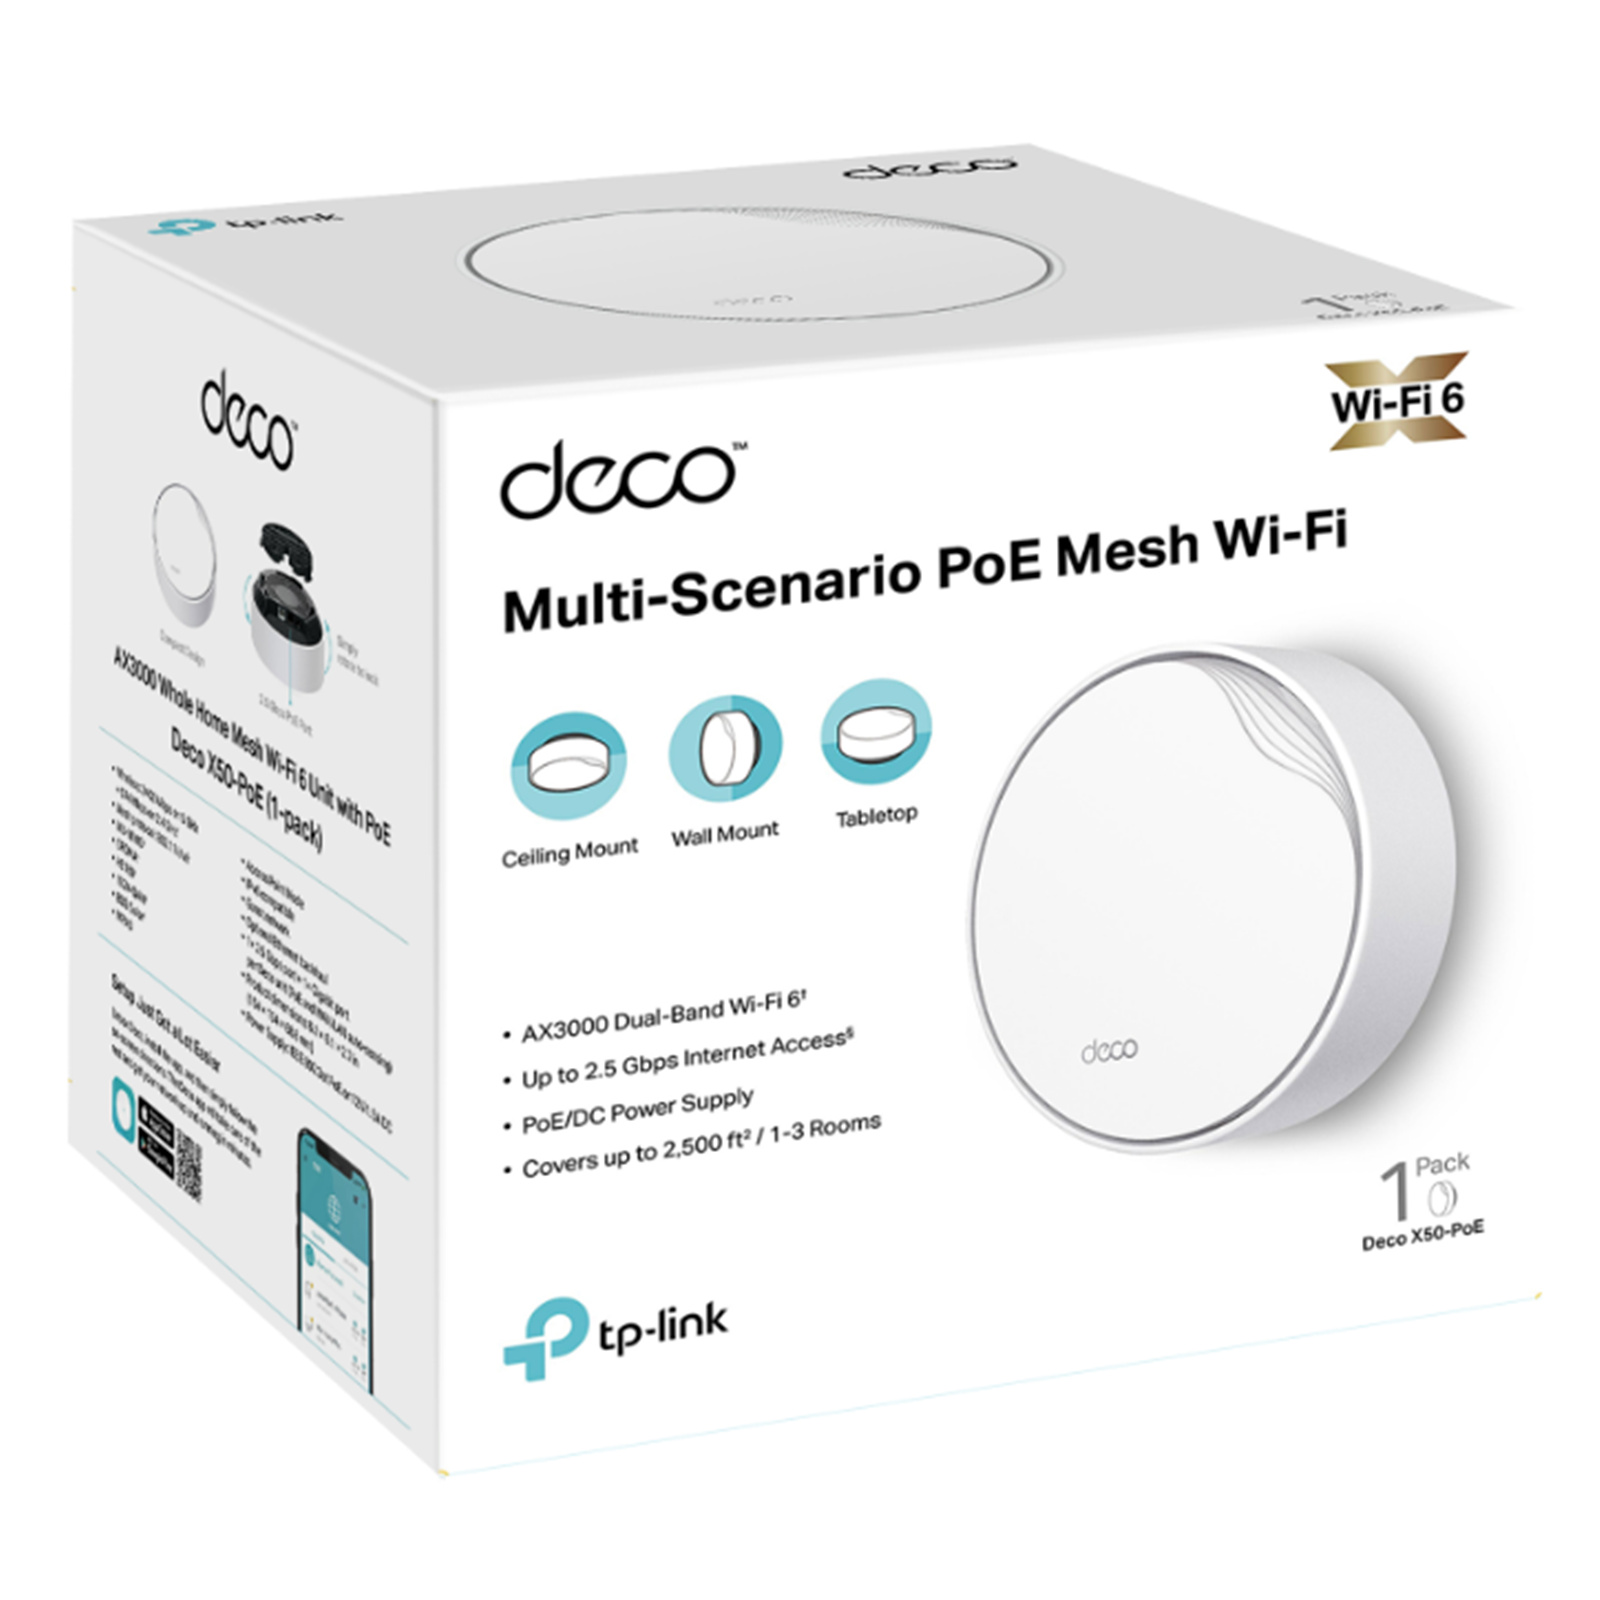 Deco X25, AX1800 Whole Home Mesh Wi-Fi 6 System